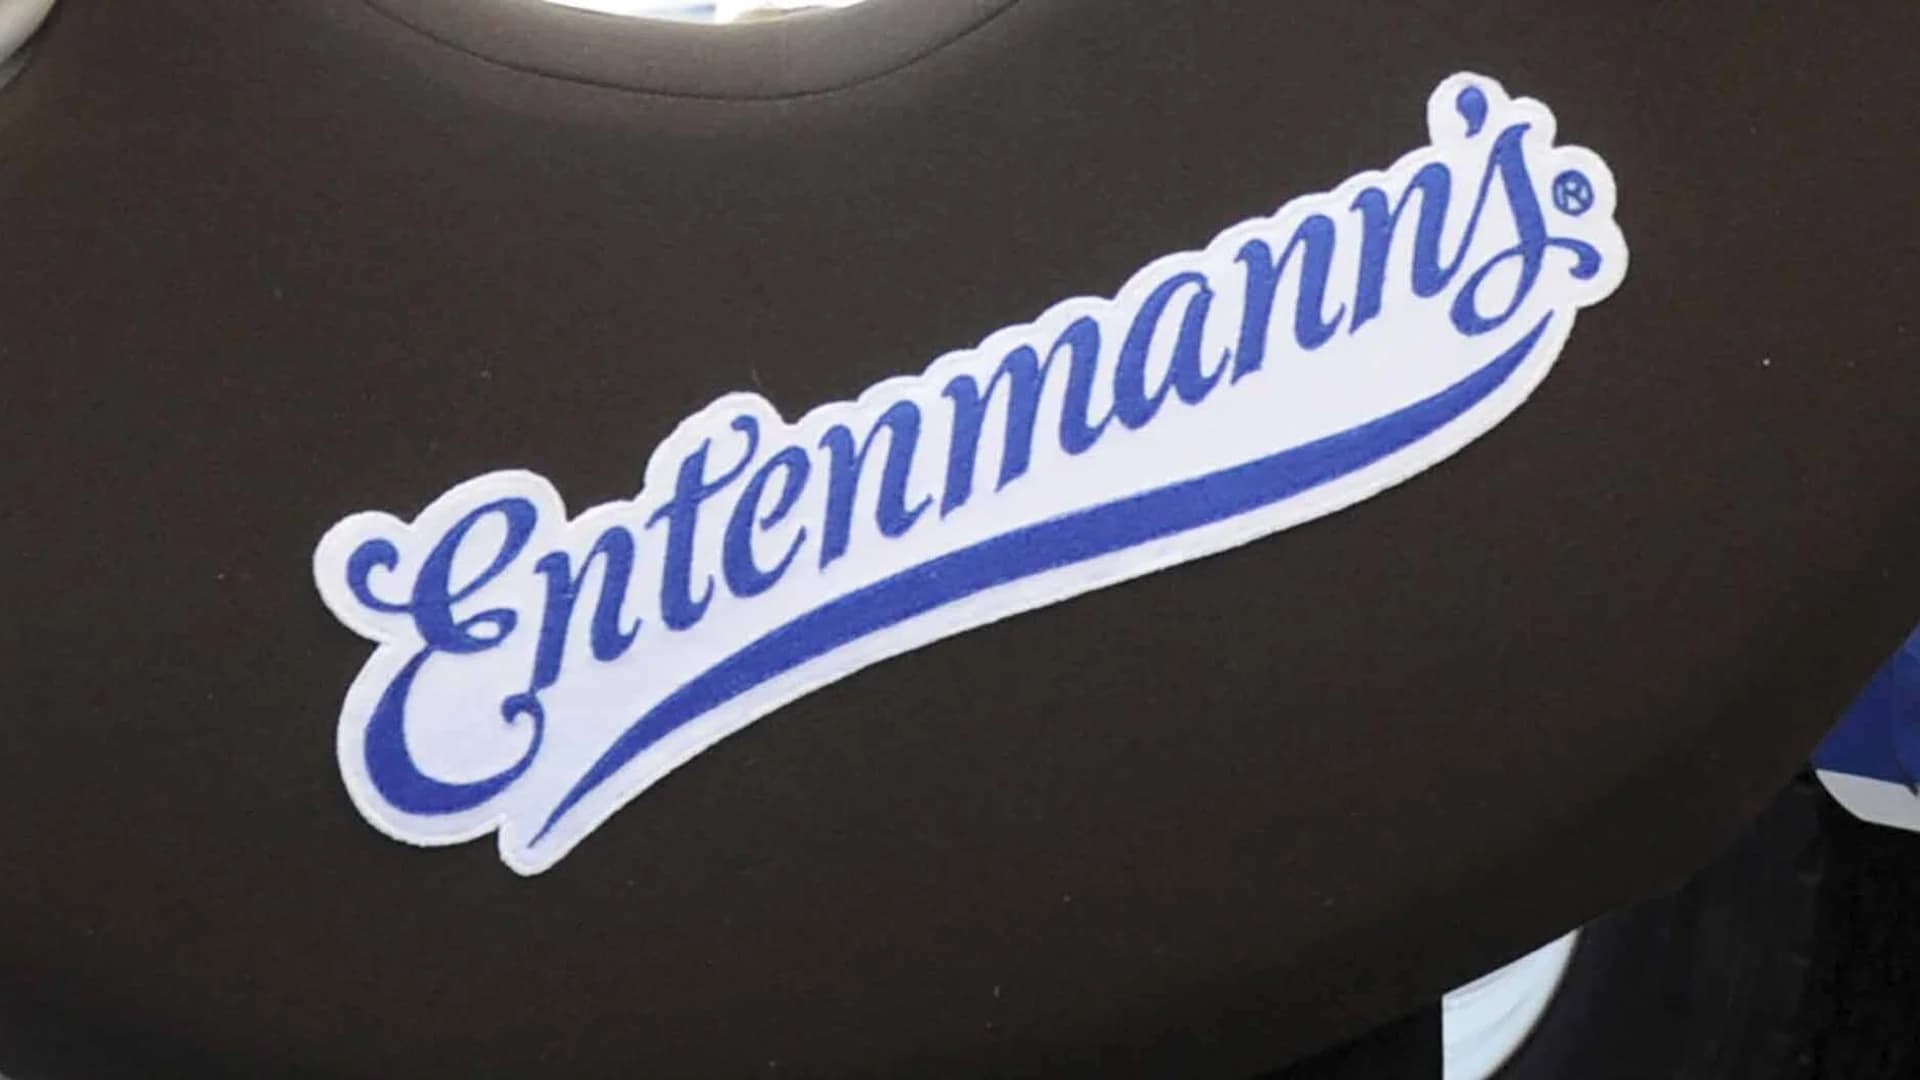 Charles Entenmann, who helped expand family's bakery into national brand, dies at 92